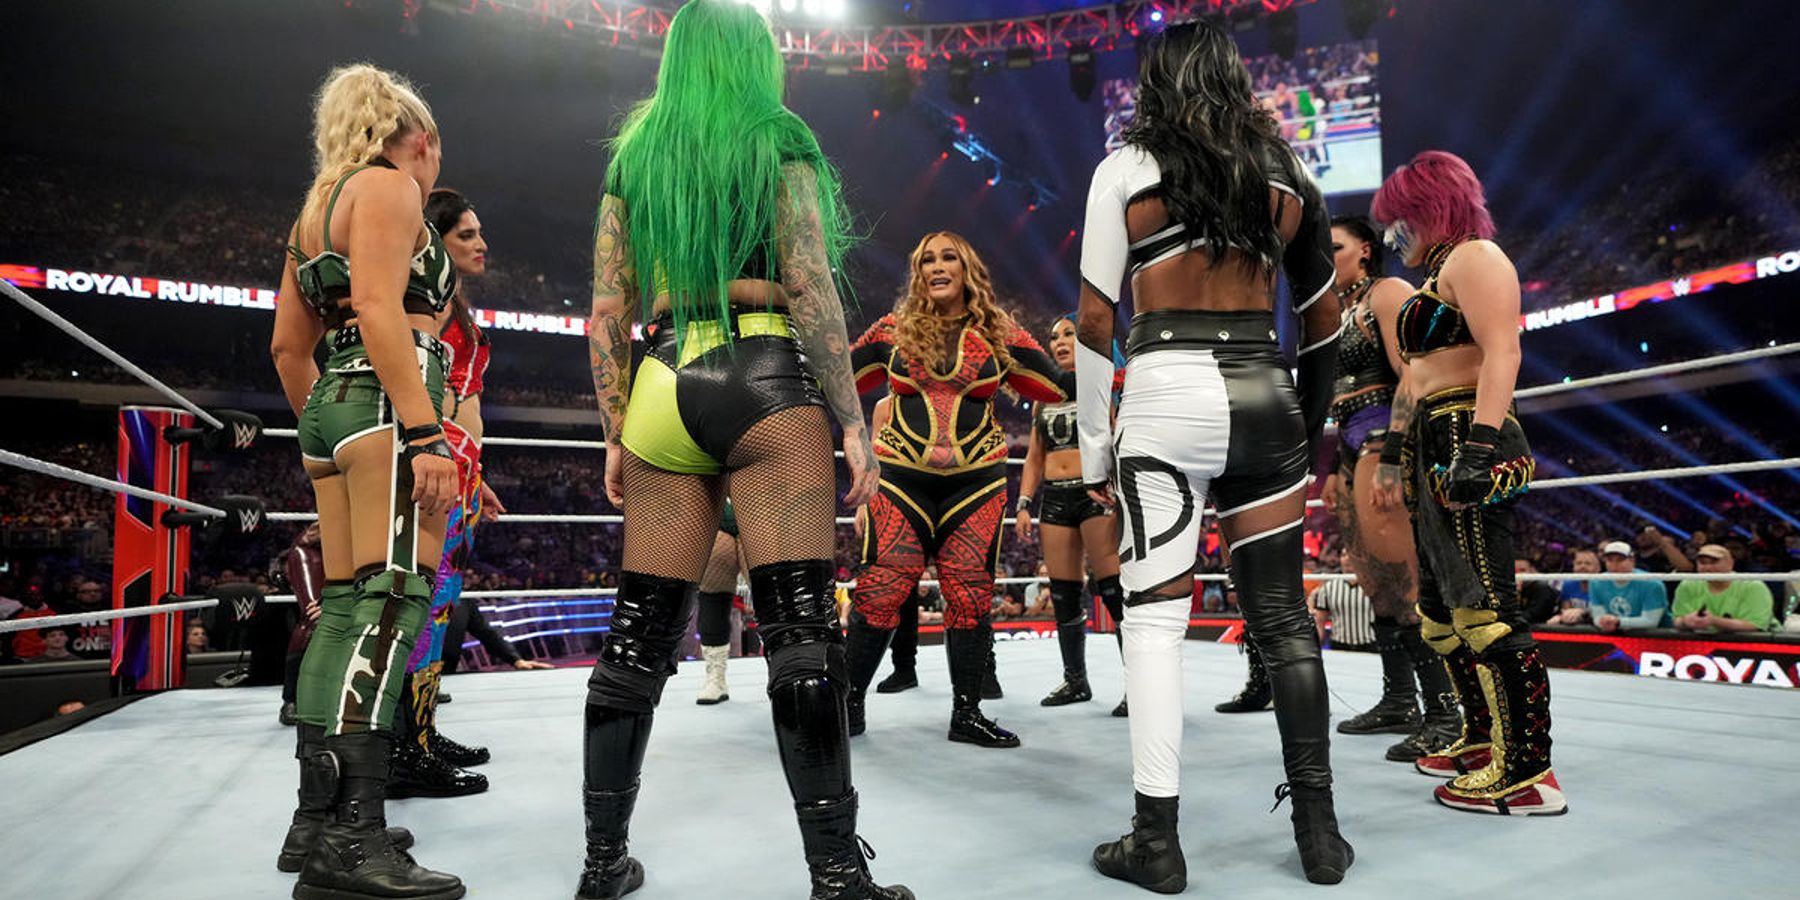 11 other wrestlers surround Nia Jax after she made her return at WWE's Royal Rumble in 2023.